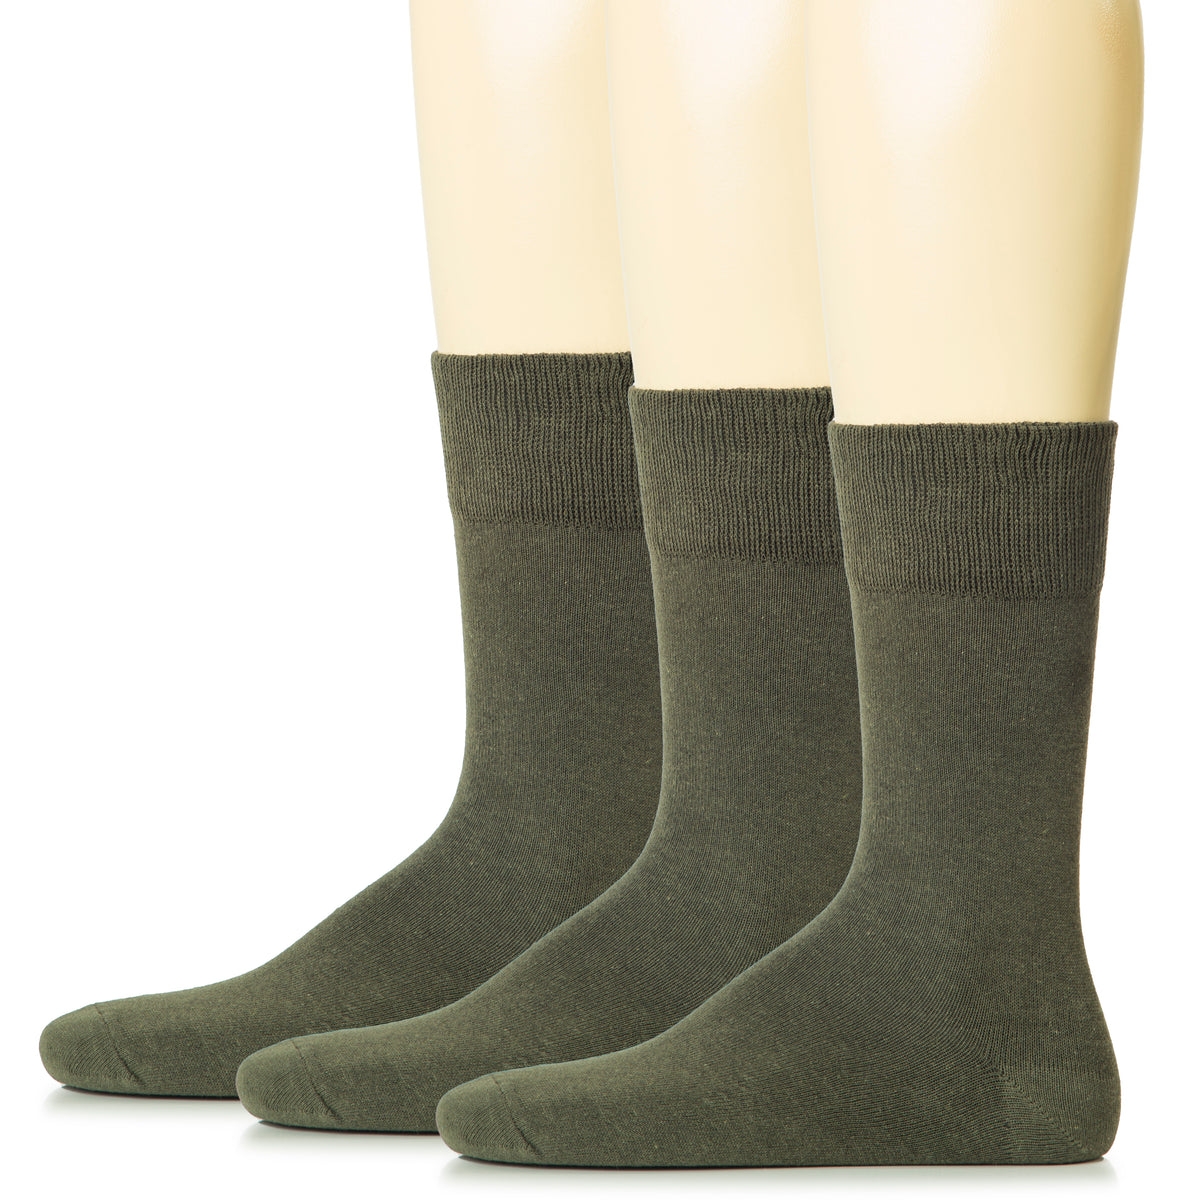 Three men's green cotton crew socks, perfect for everyday wear and comfort.